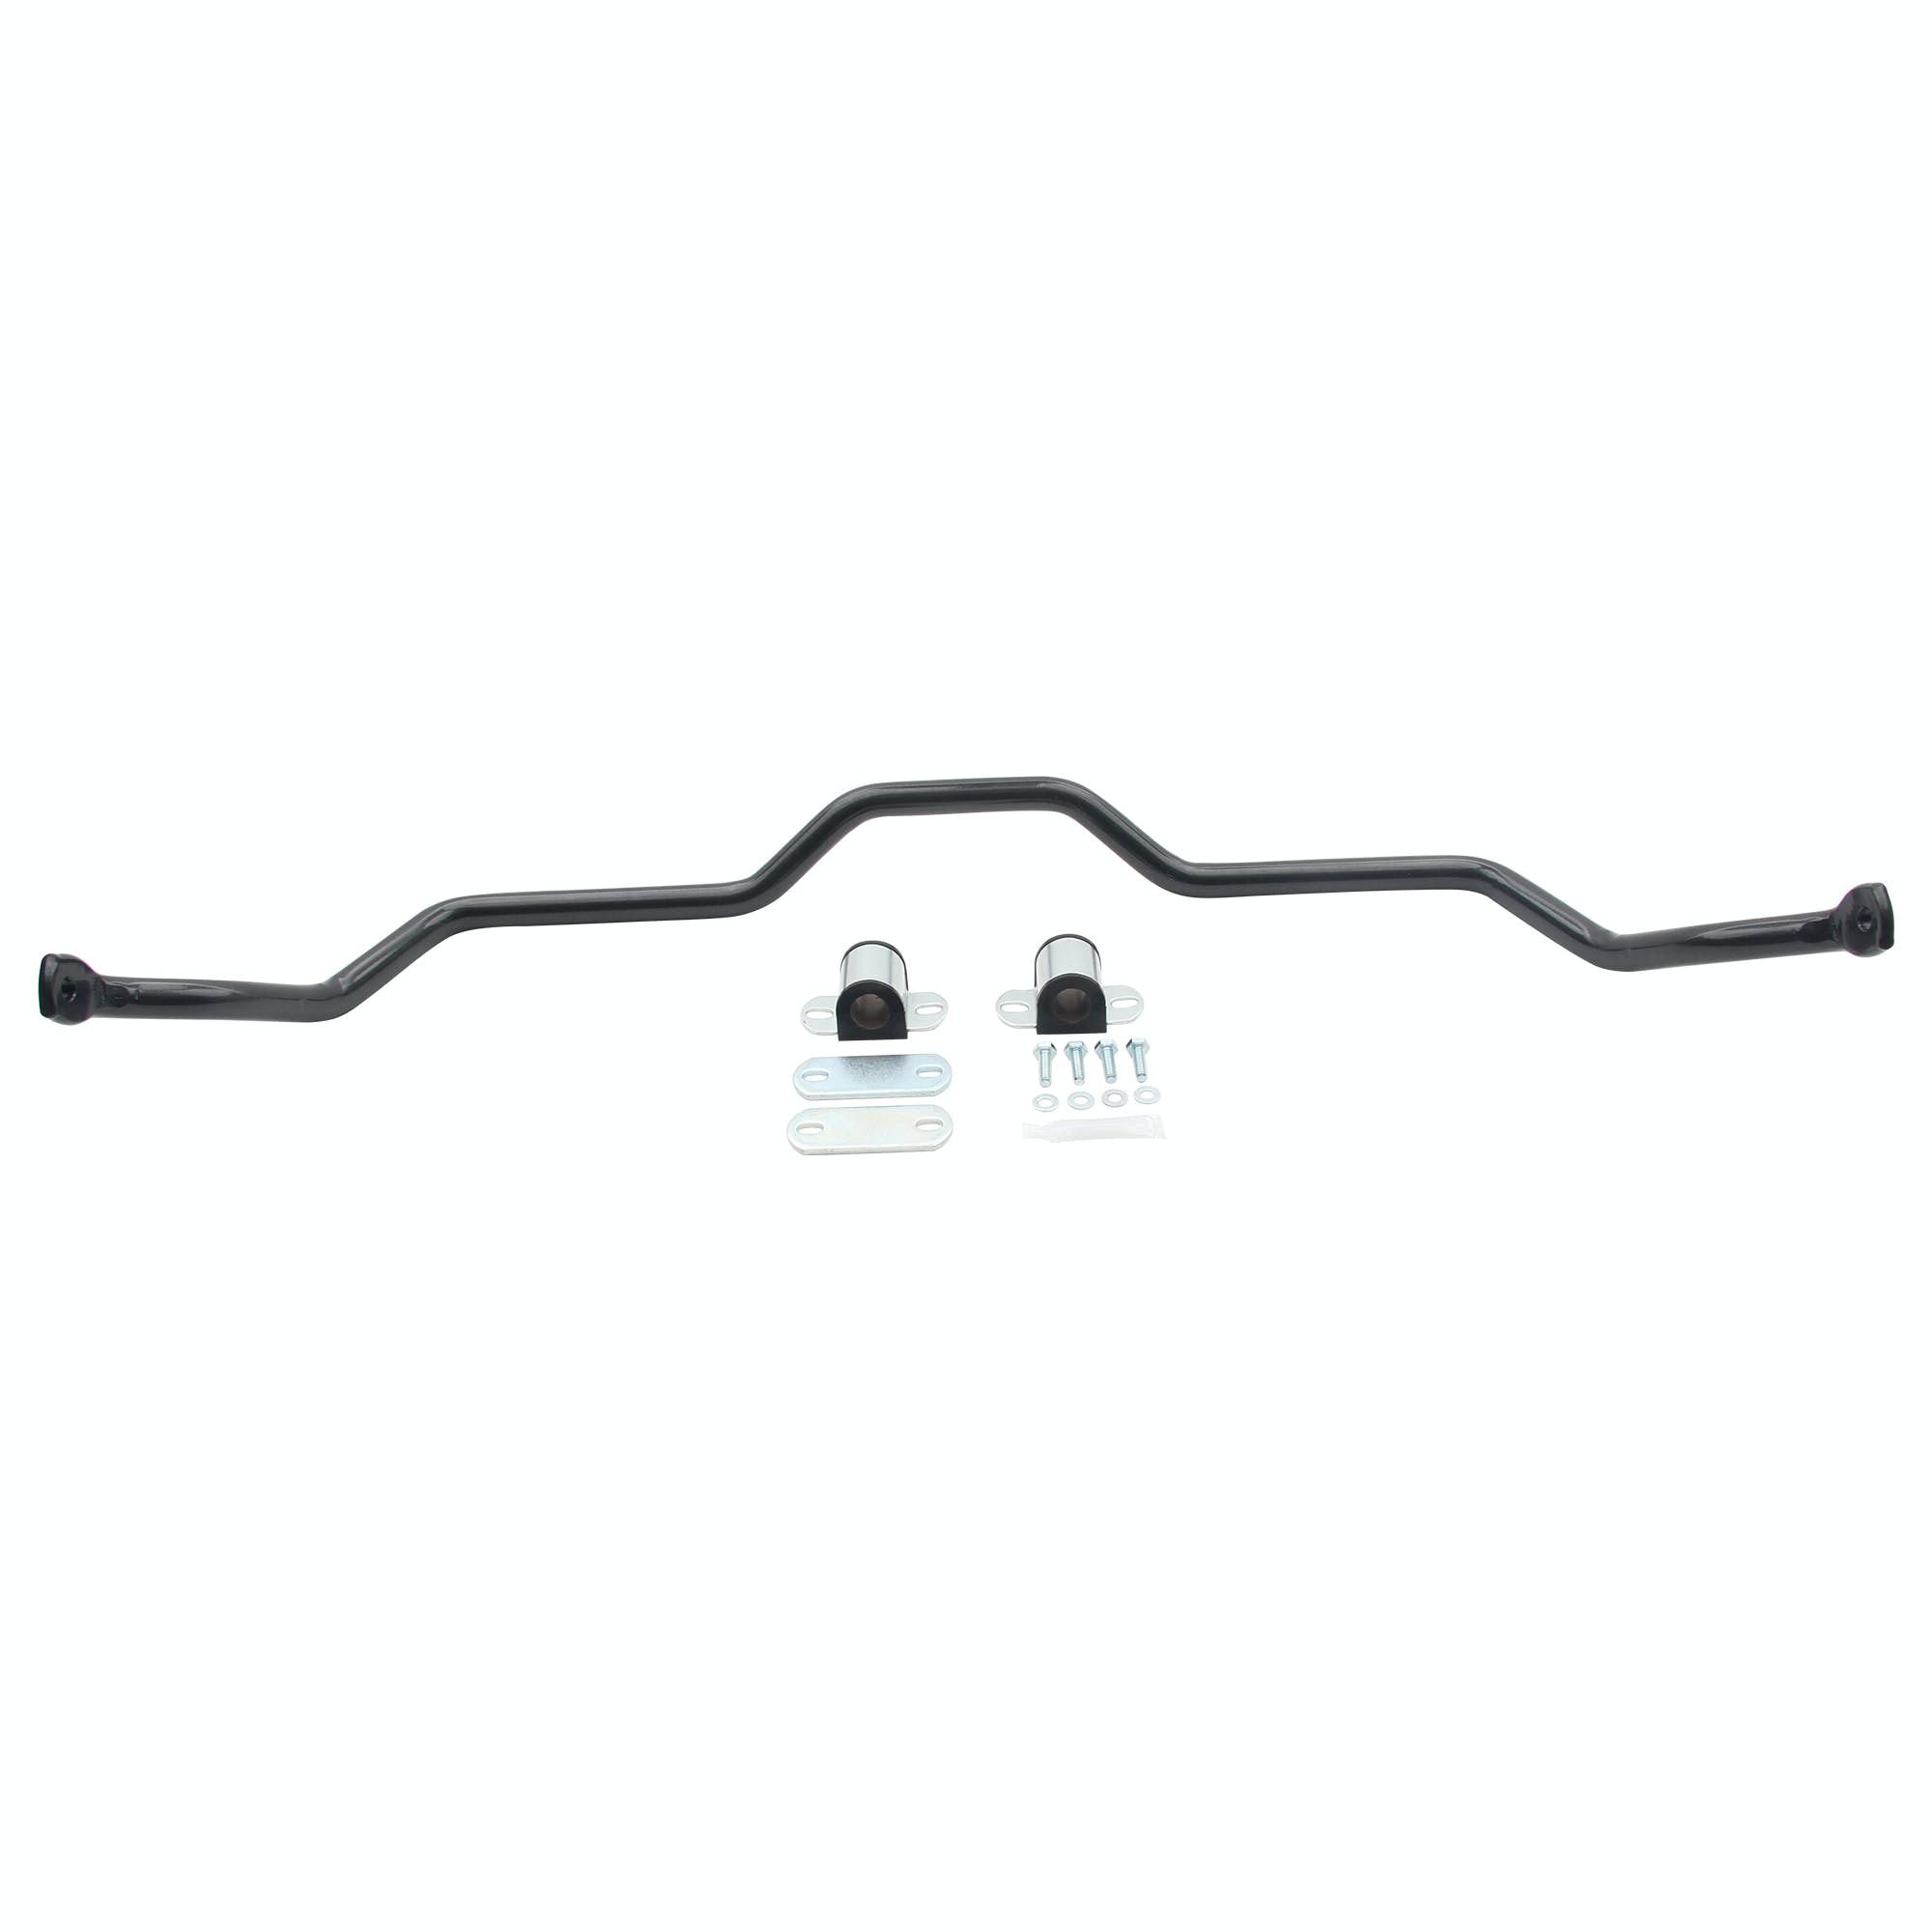 ST Suspensions 50185 Front Anti-Swaybar